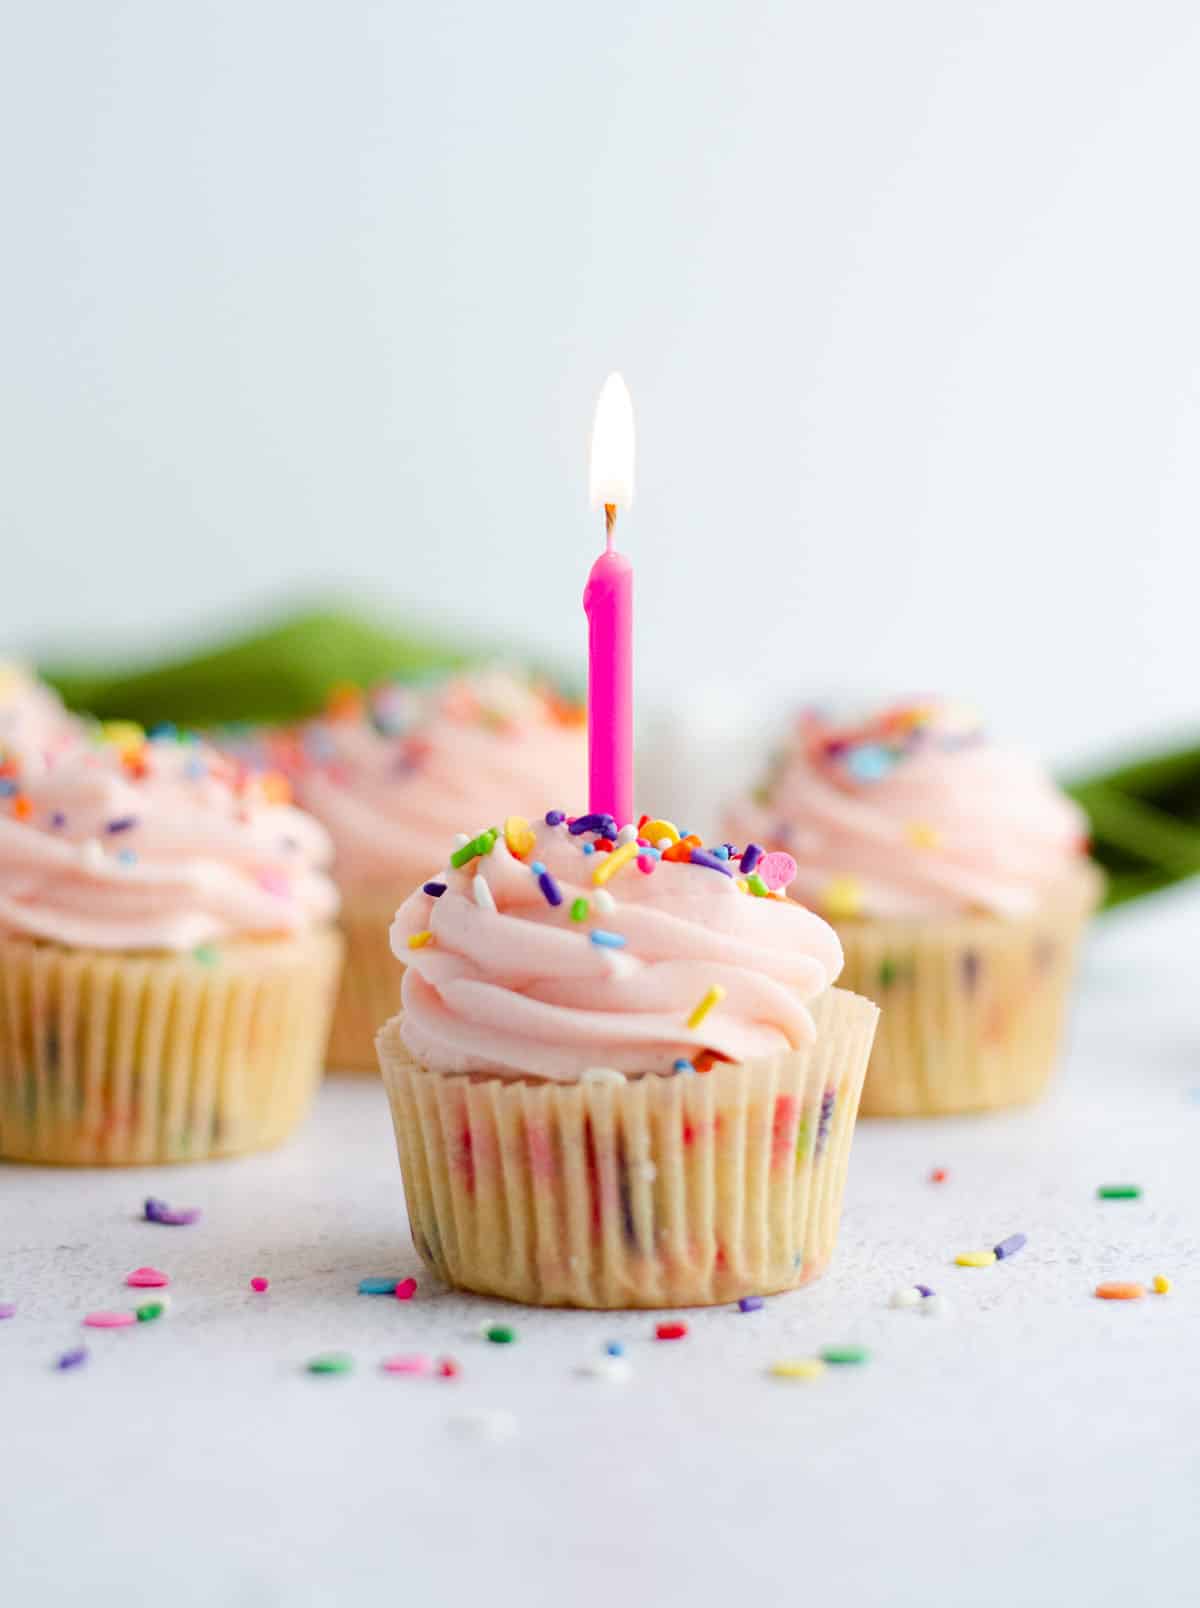 homemade funfetti cupcake with pink frosting and a lighted pink birthday candle 